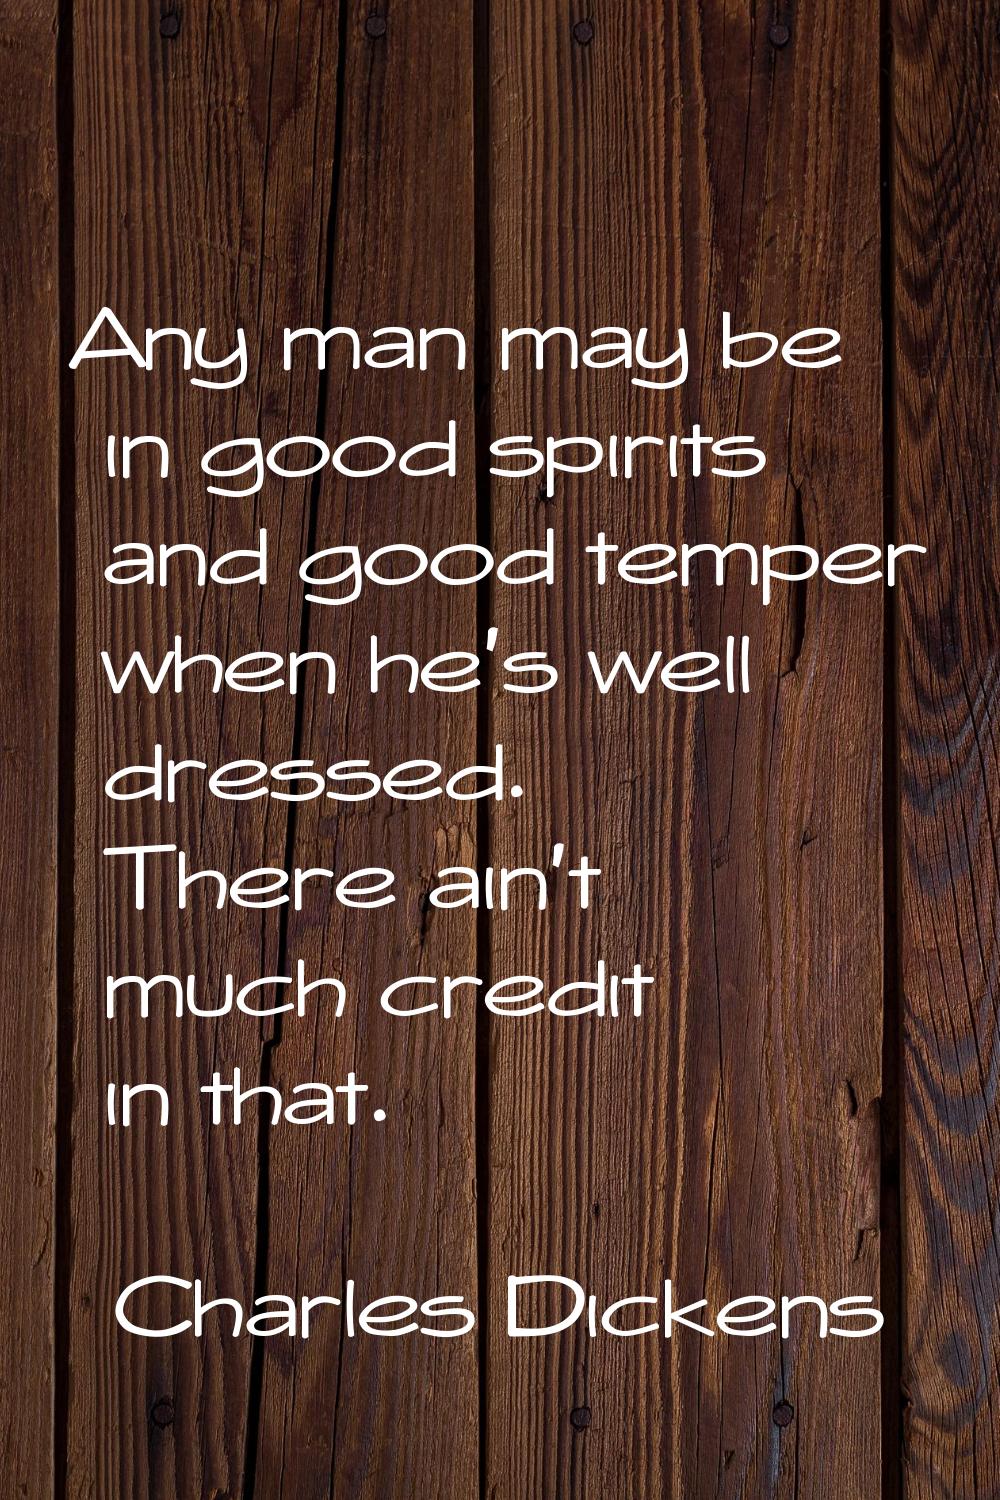 Any man may be in good spirits and good temper when he's well dressed. There ain't much credit in t